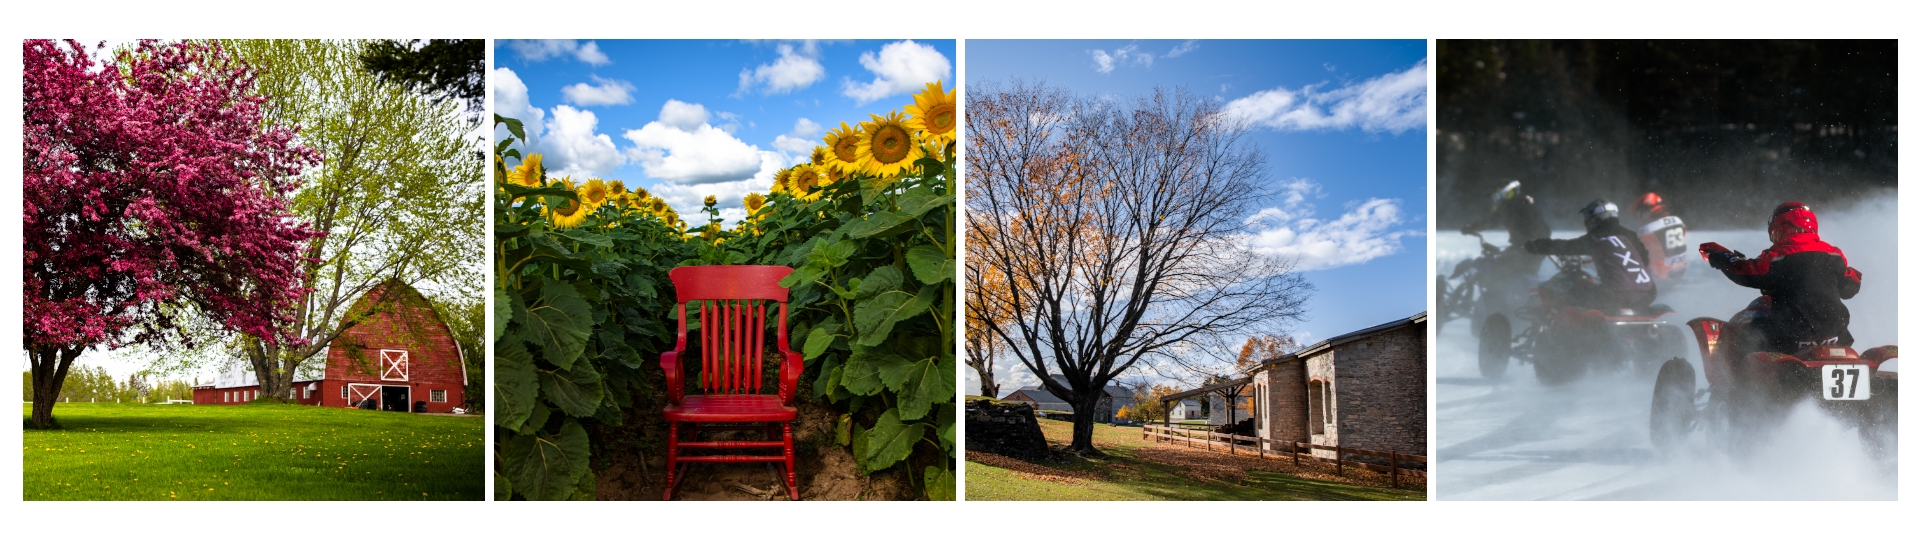 A collage of four images depicting the beauty of each season: Spring blossoms, Summer sunshine, Fall foliage, and Winter snow.